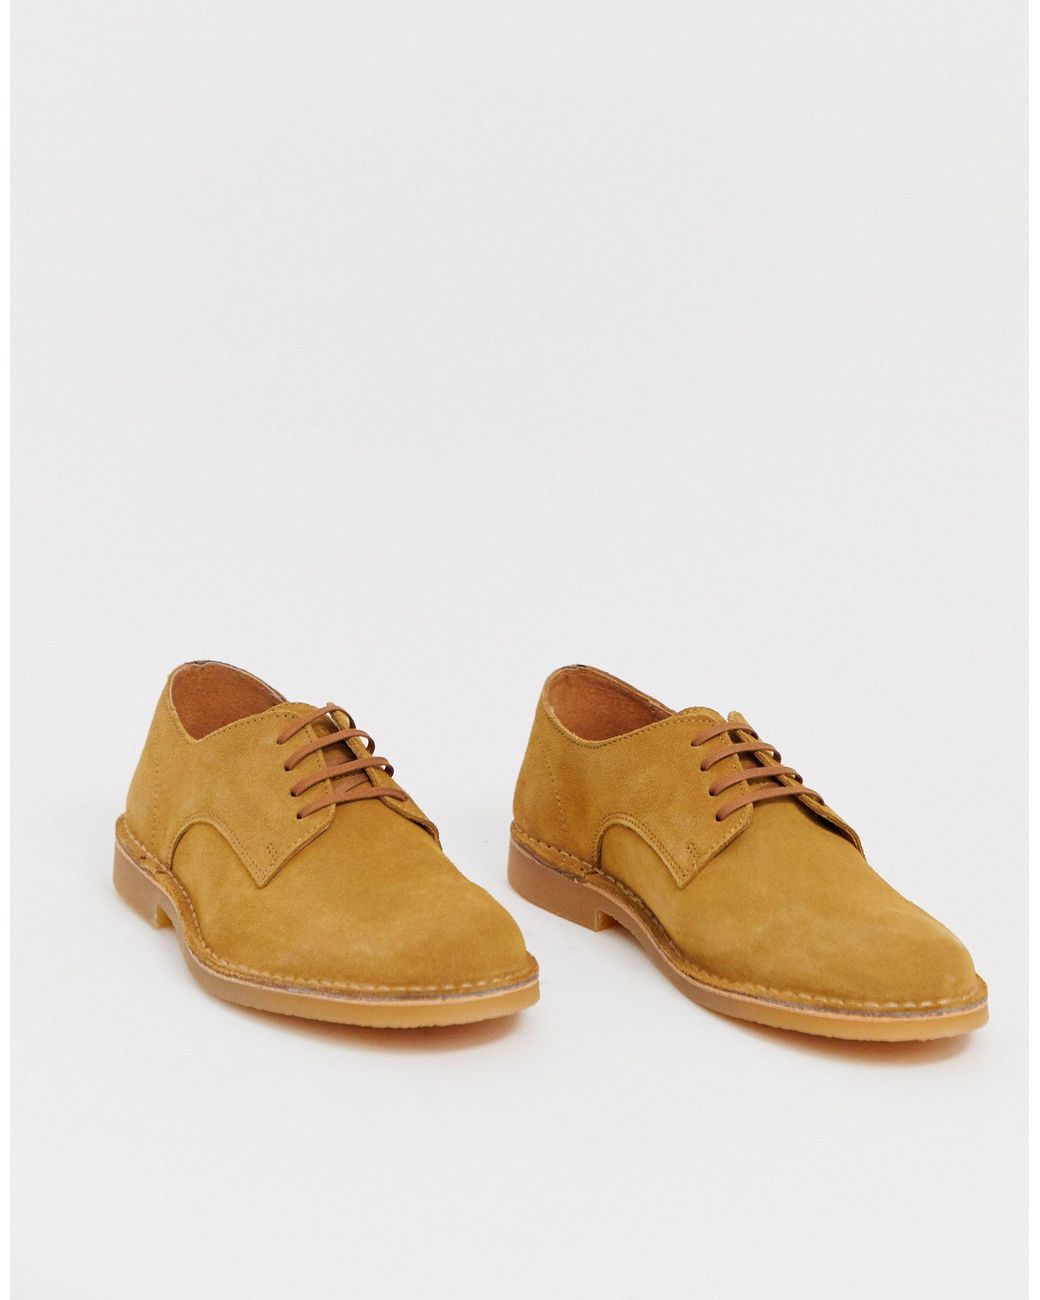 SELECTED Suede Shoes in Brown for Men | Lyst